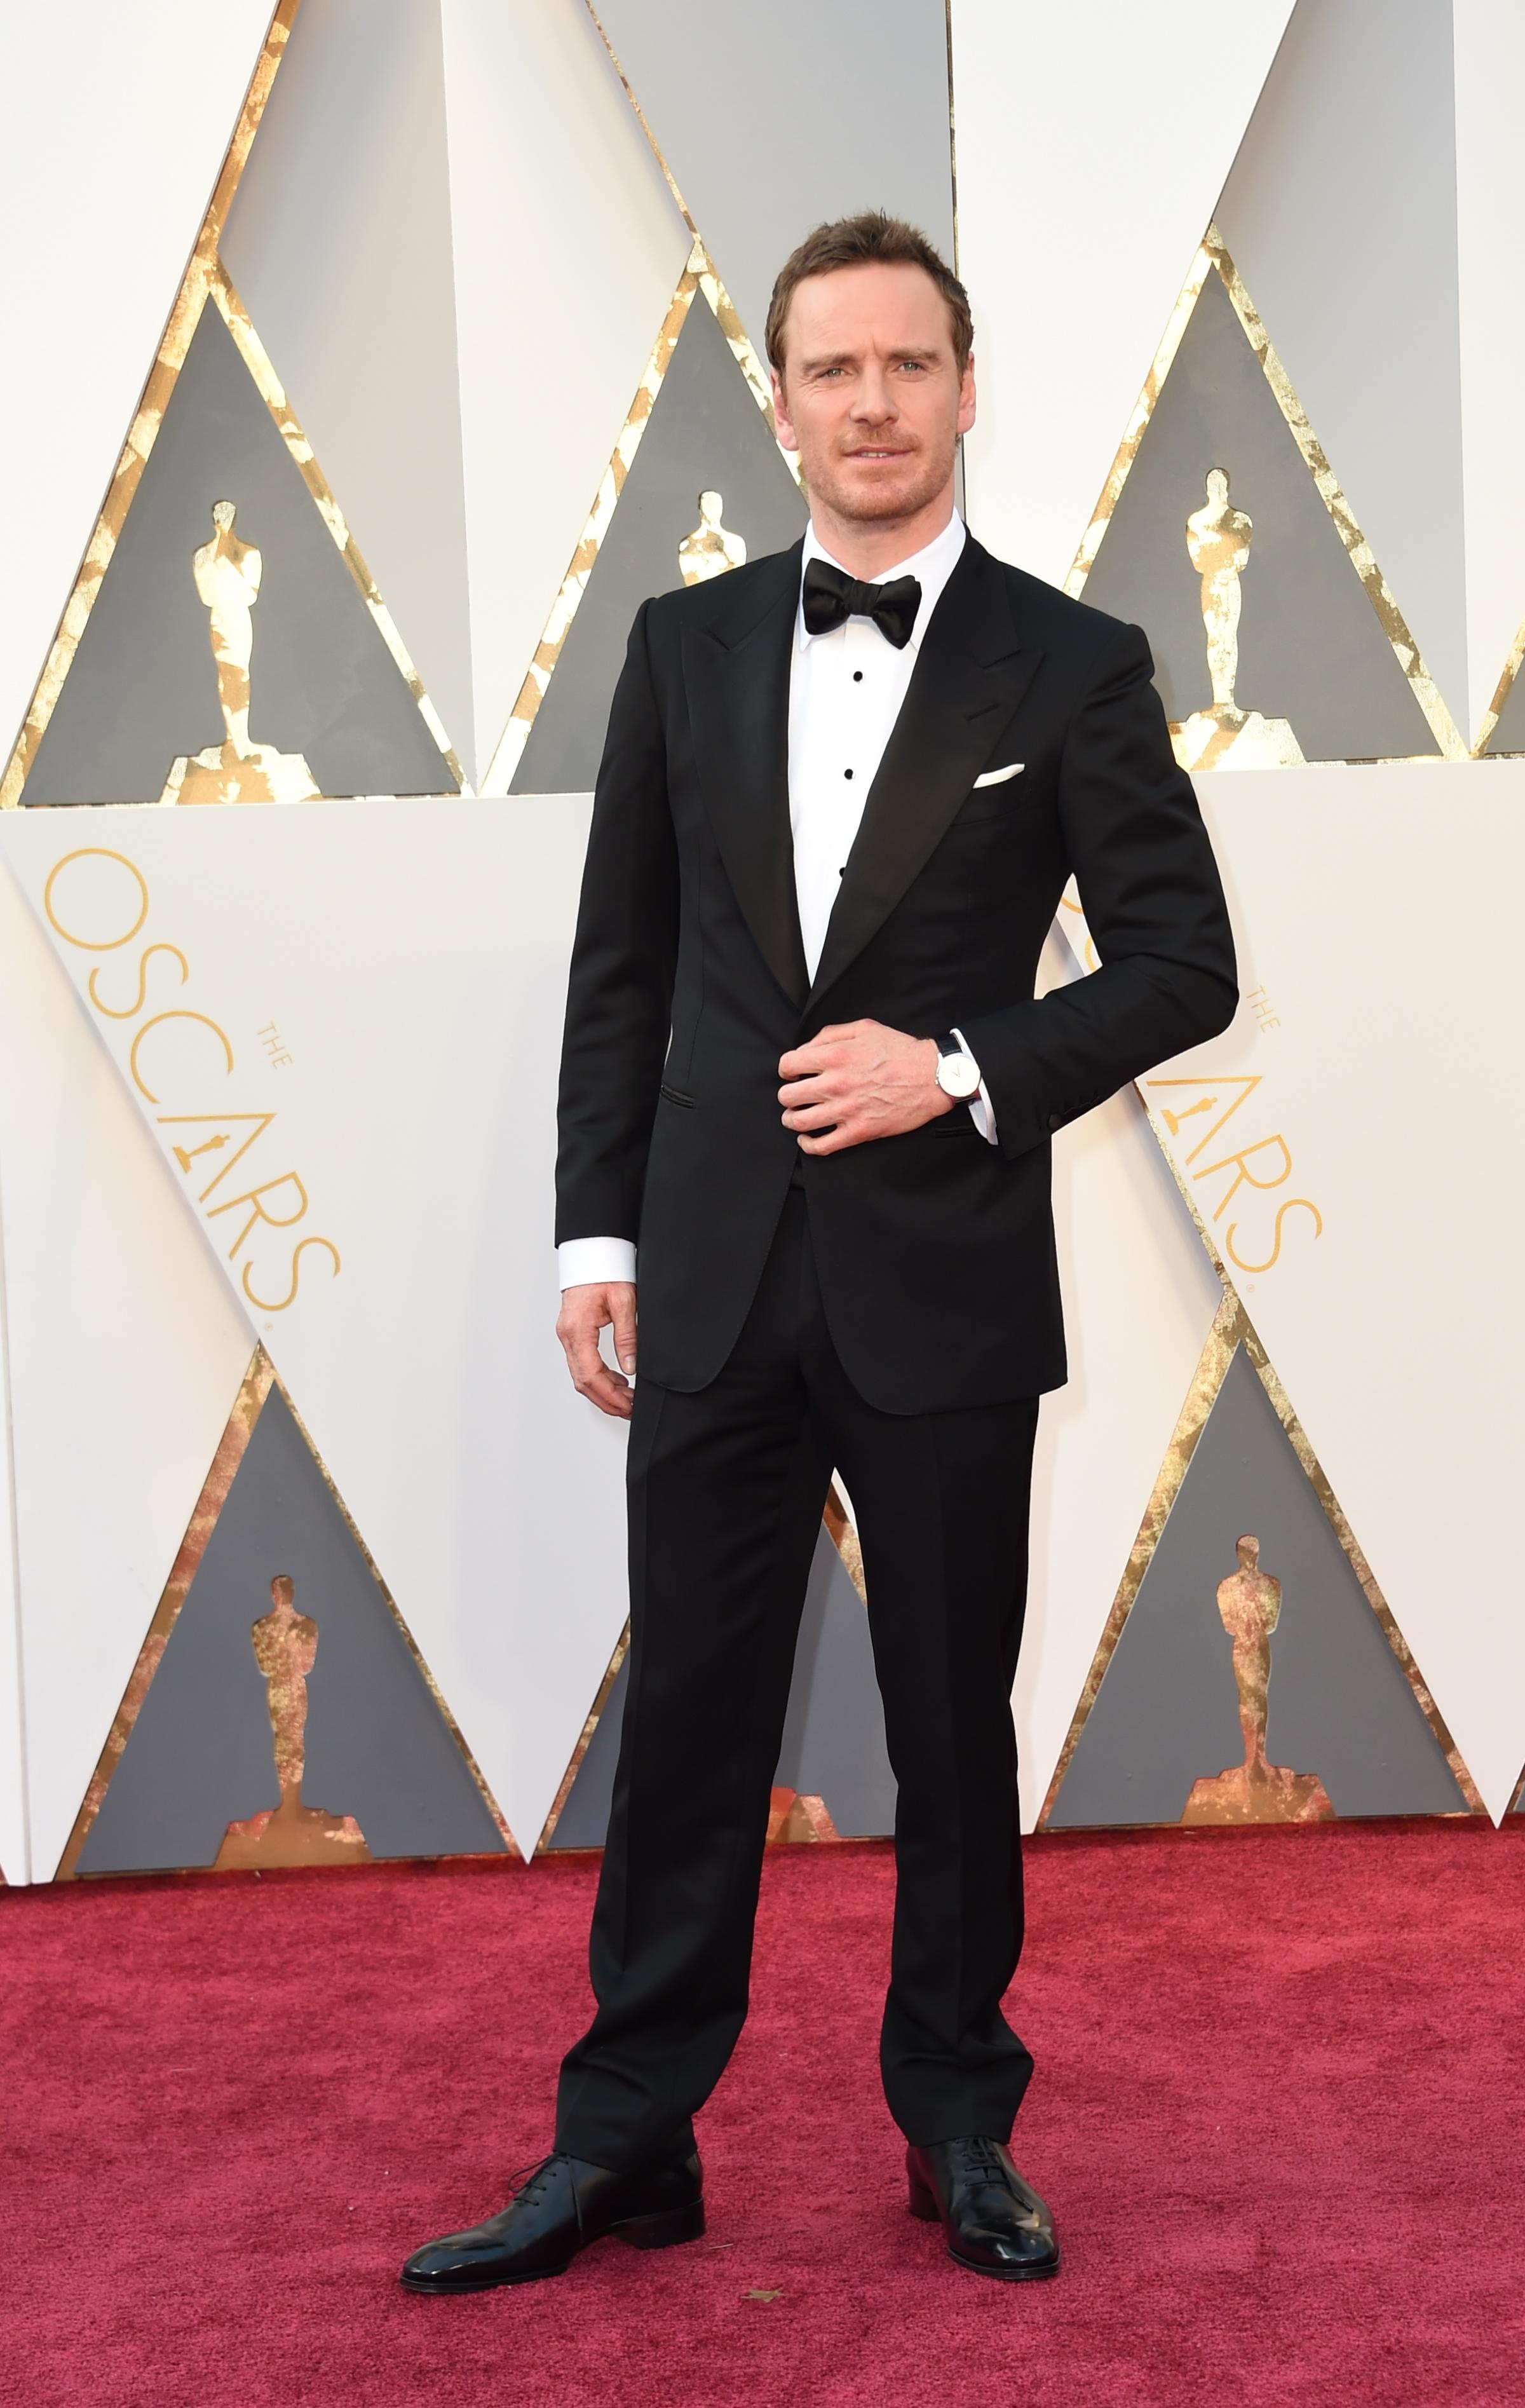 Michael Fassbender attends the 88th Annual Academy Awards on Feb. 28, 2016 in Hollywood, Calif.